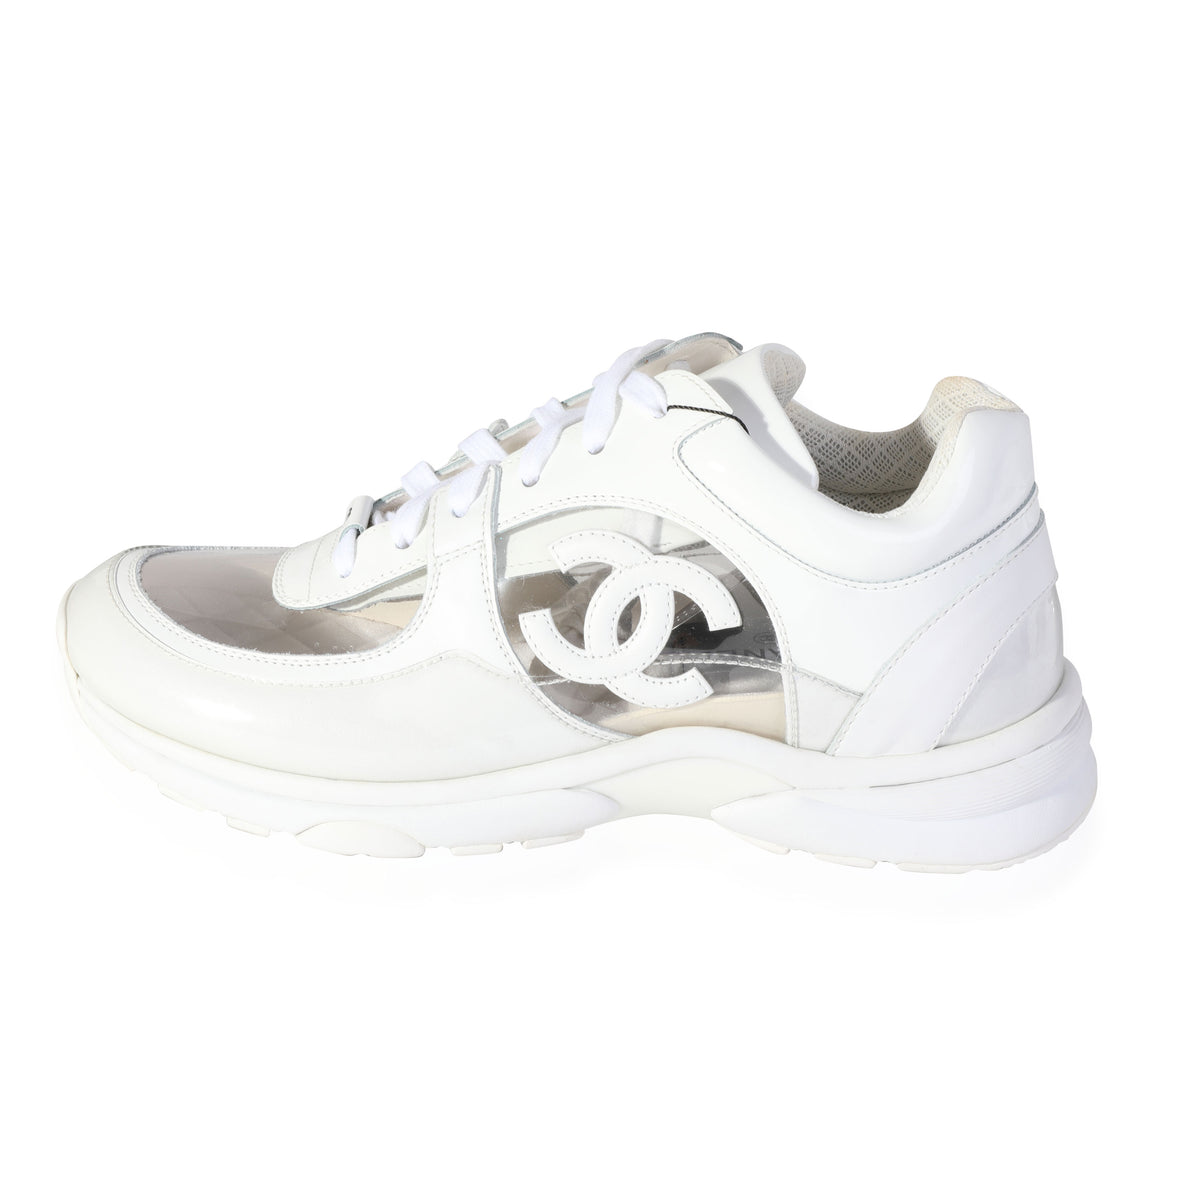 white and clear chanel sneakers